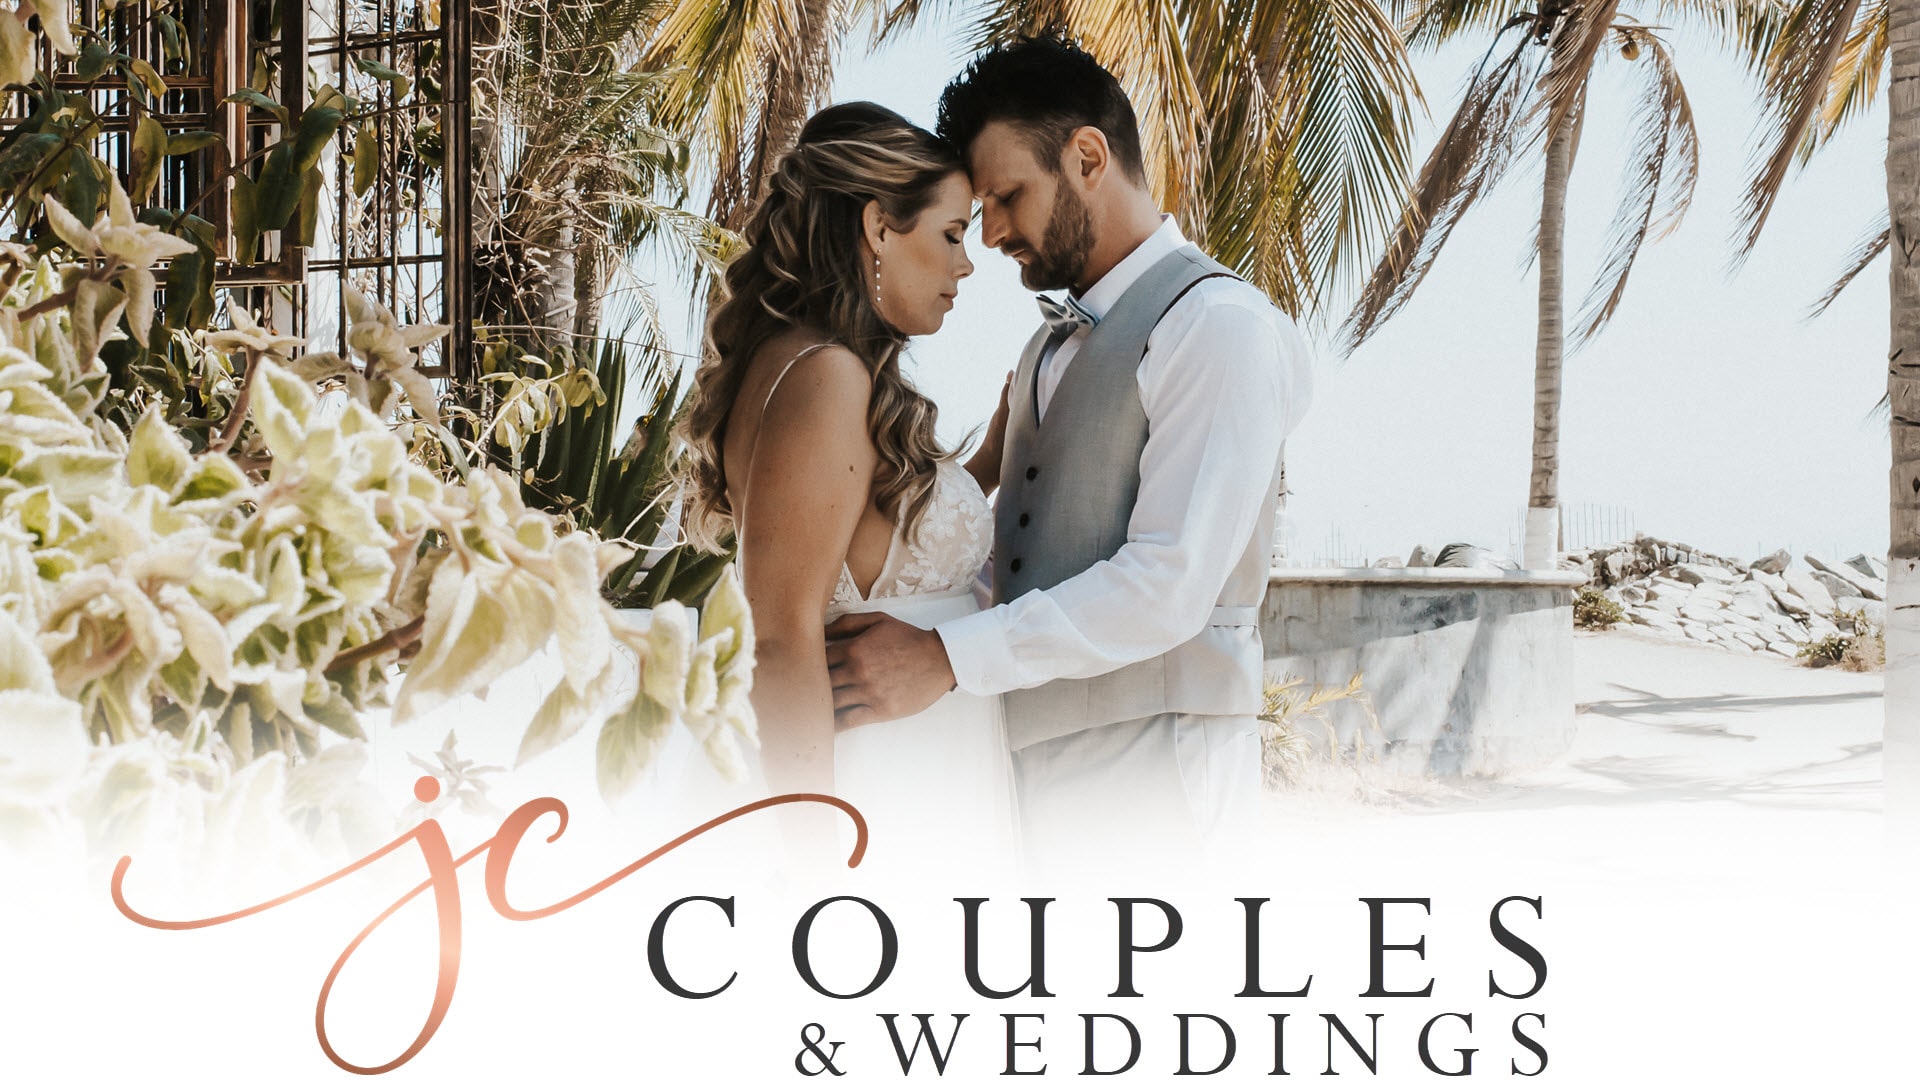 Couples & Wedding Pictures | Jacyln Christian Photography